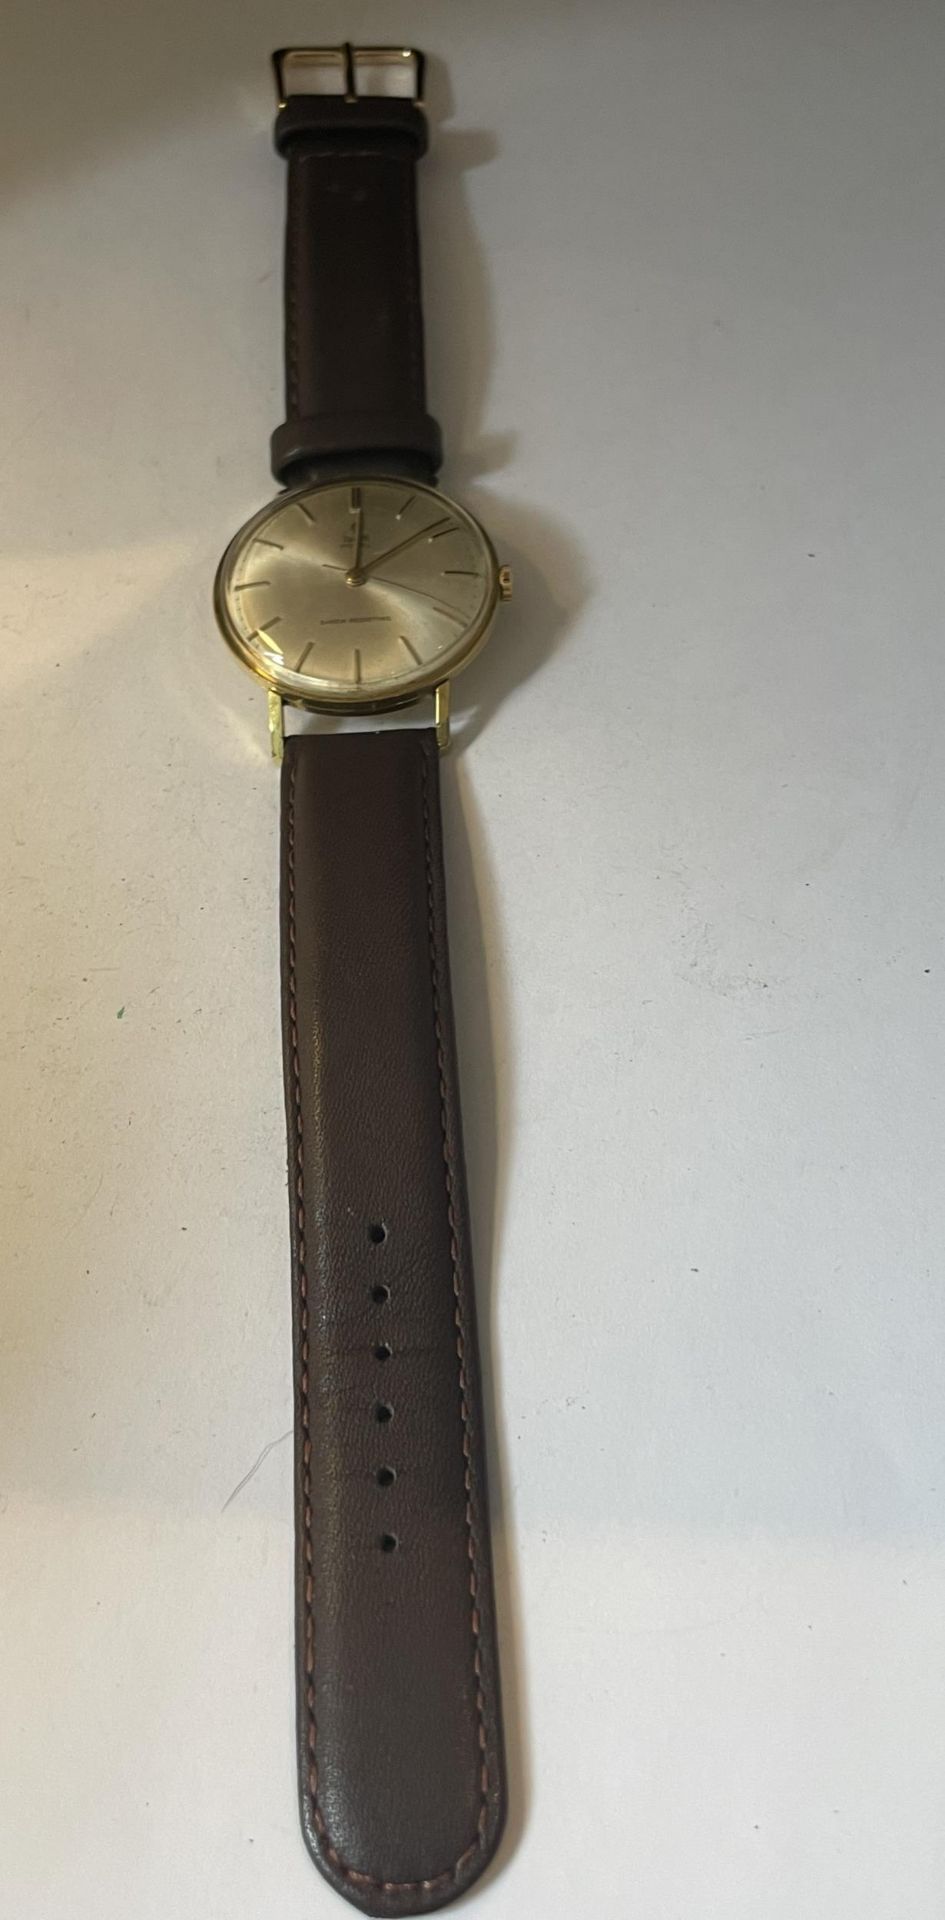 A GENTS TUDOR ROLEX ROYAL GOLD PLATED WRIST WATCH NOT IN ORIGINAL PRESENTATION BOX SEEN WORKING - Image 2 of 4